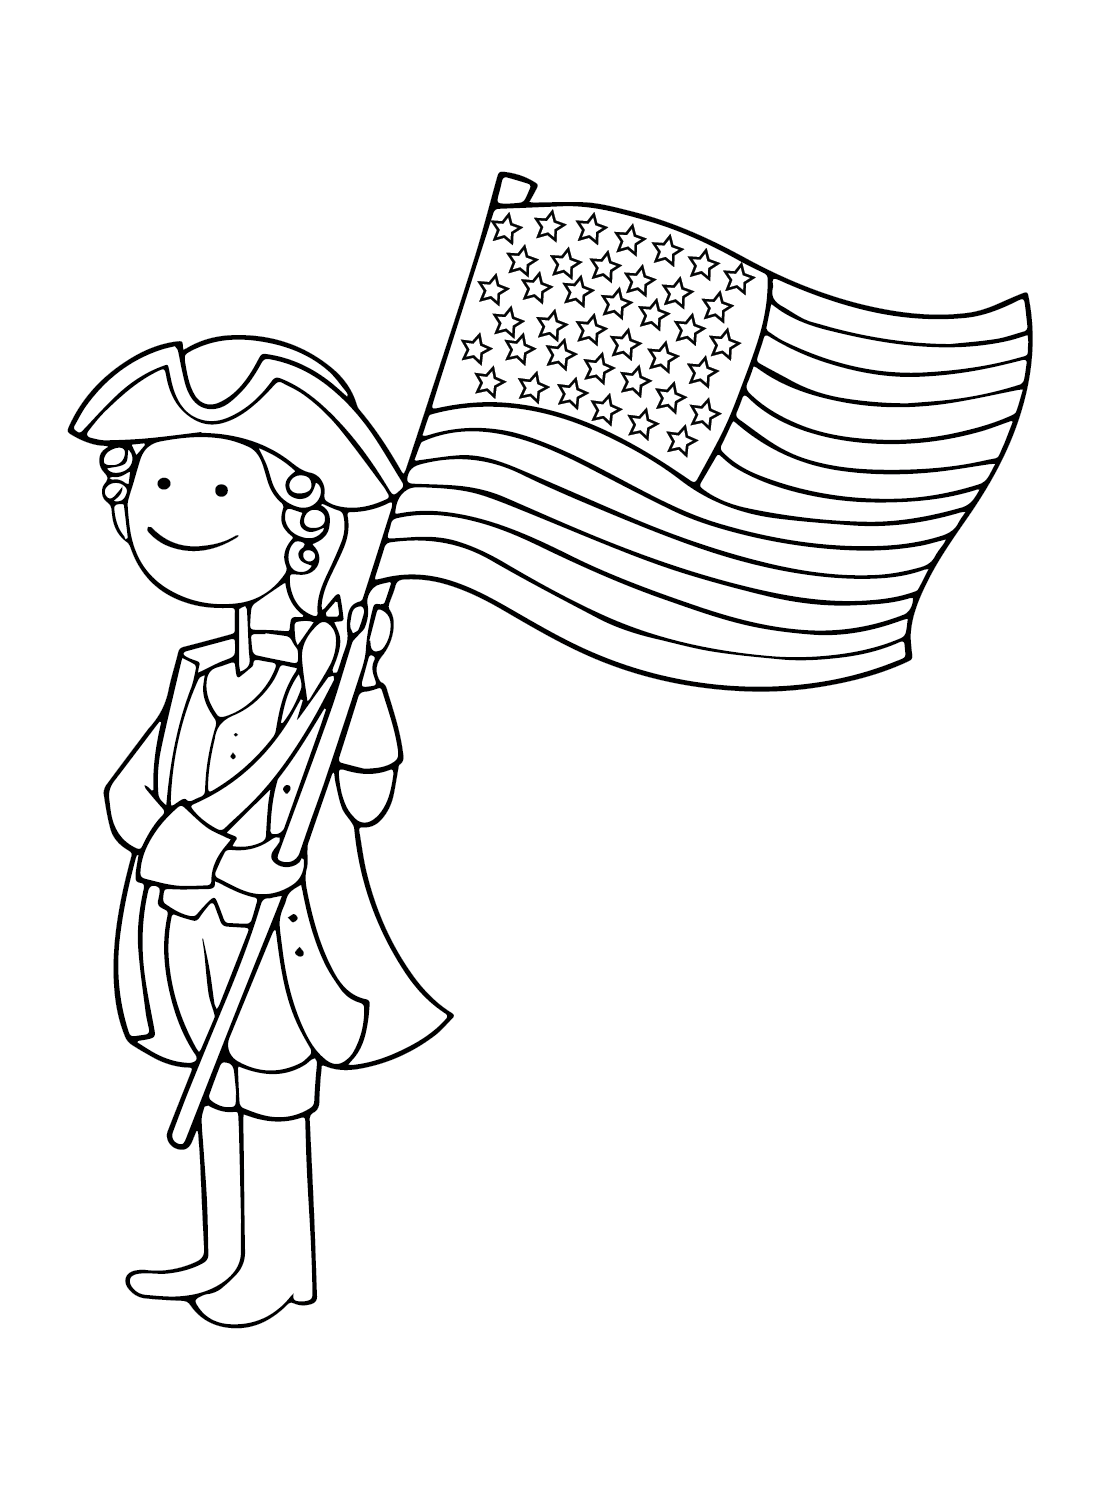 American Flag Cartoon Coloring Page